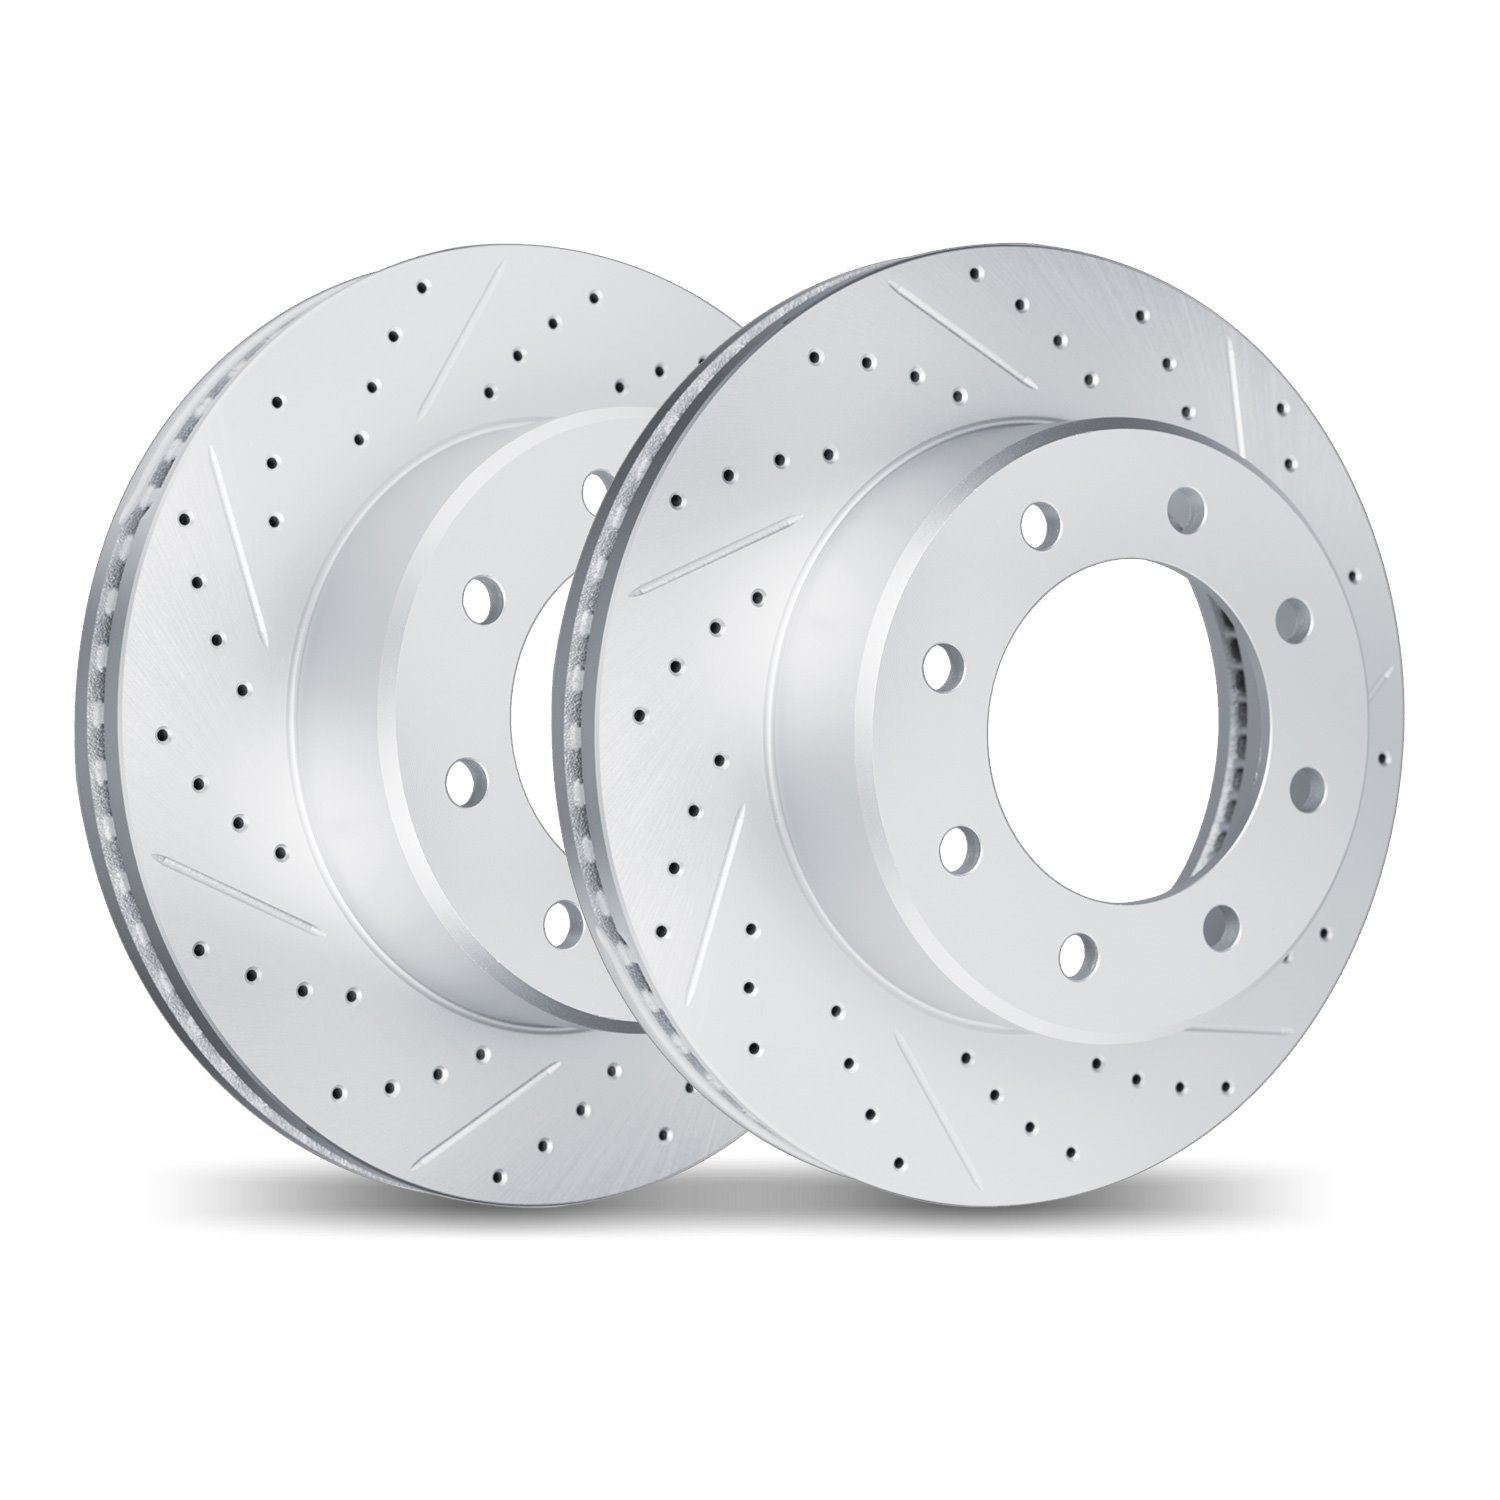 2002-54154 Geoperformance Drilled/Slotted Brake Rotors, 2005-2012 Ford/Lincoln/Mercury/Mazda, Position: Rear